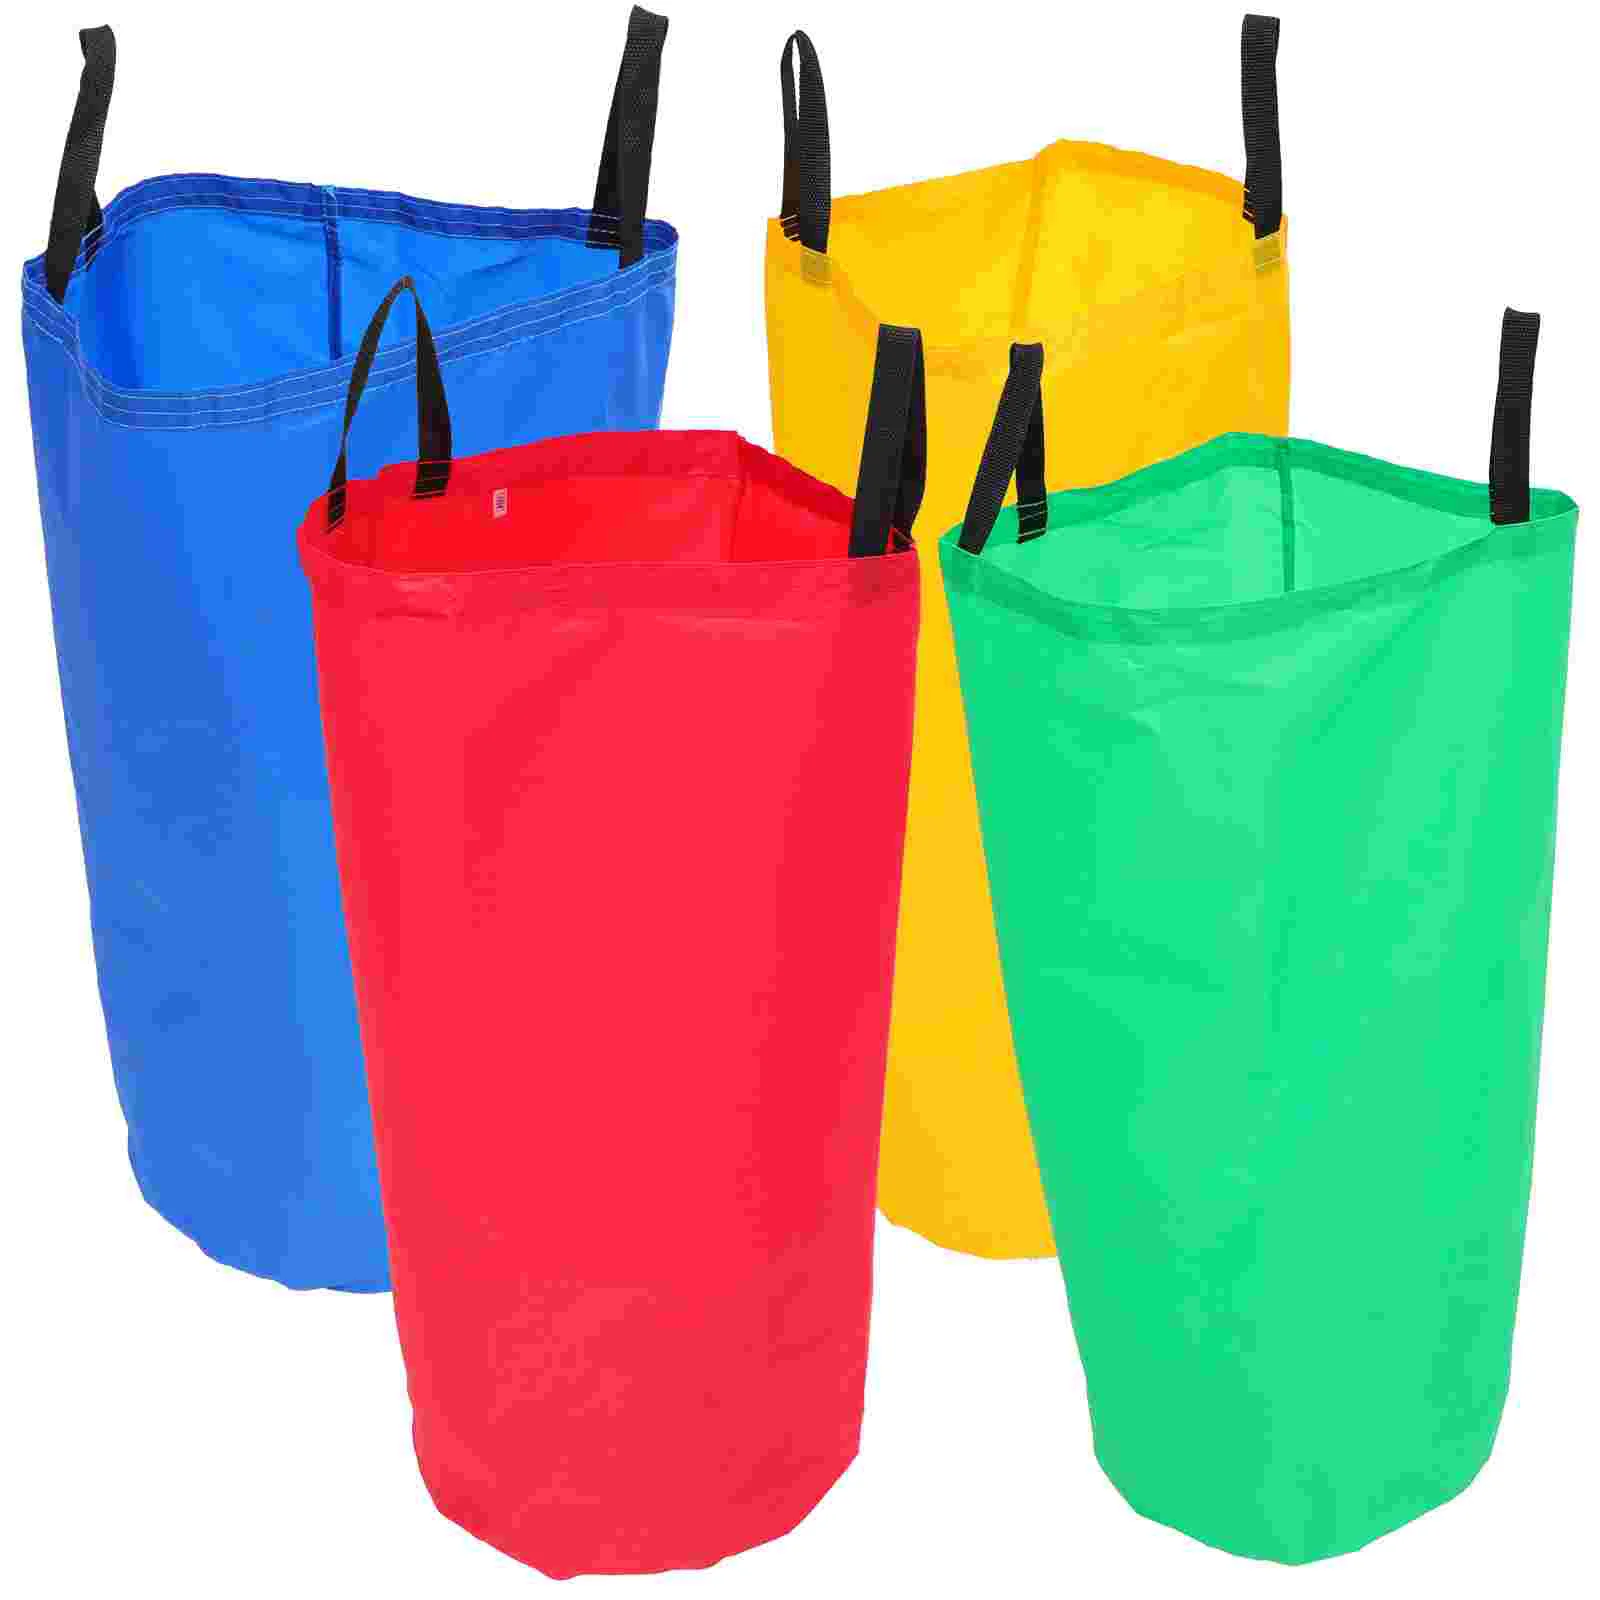 

Children's Jumping Bag Sack Race Outdoor Toy Field Potato Bags Carnival Party Game Adulttoy